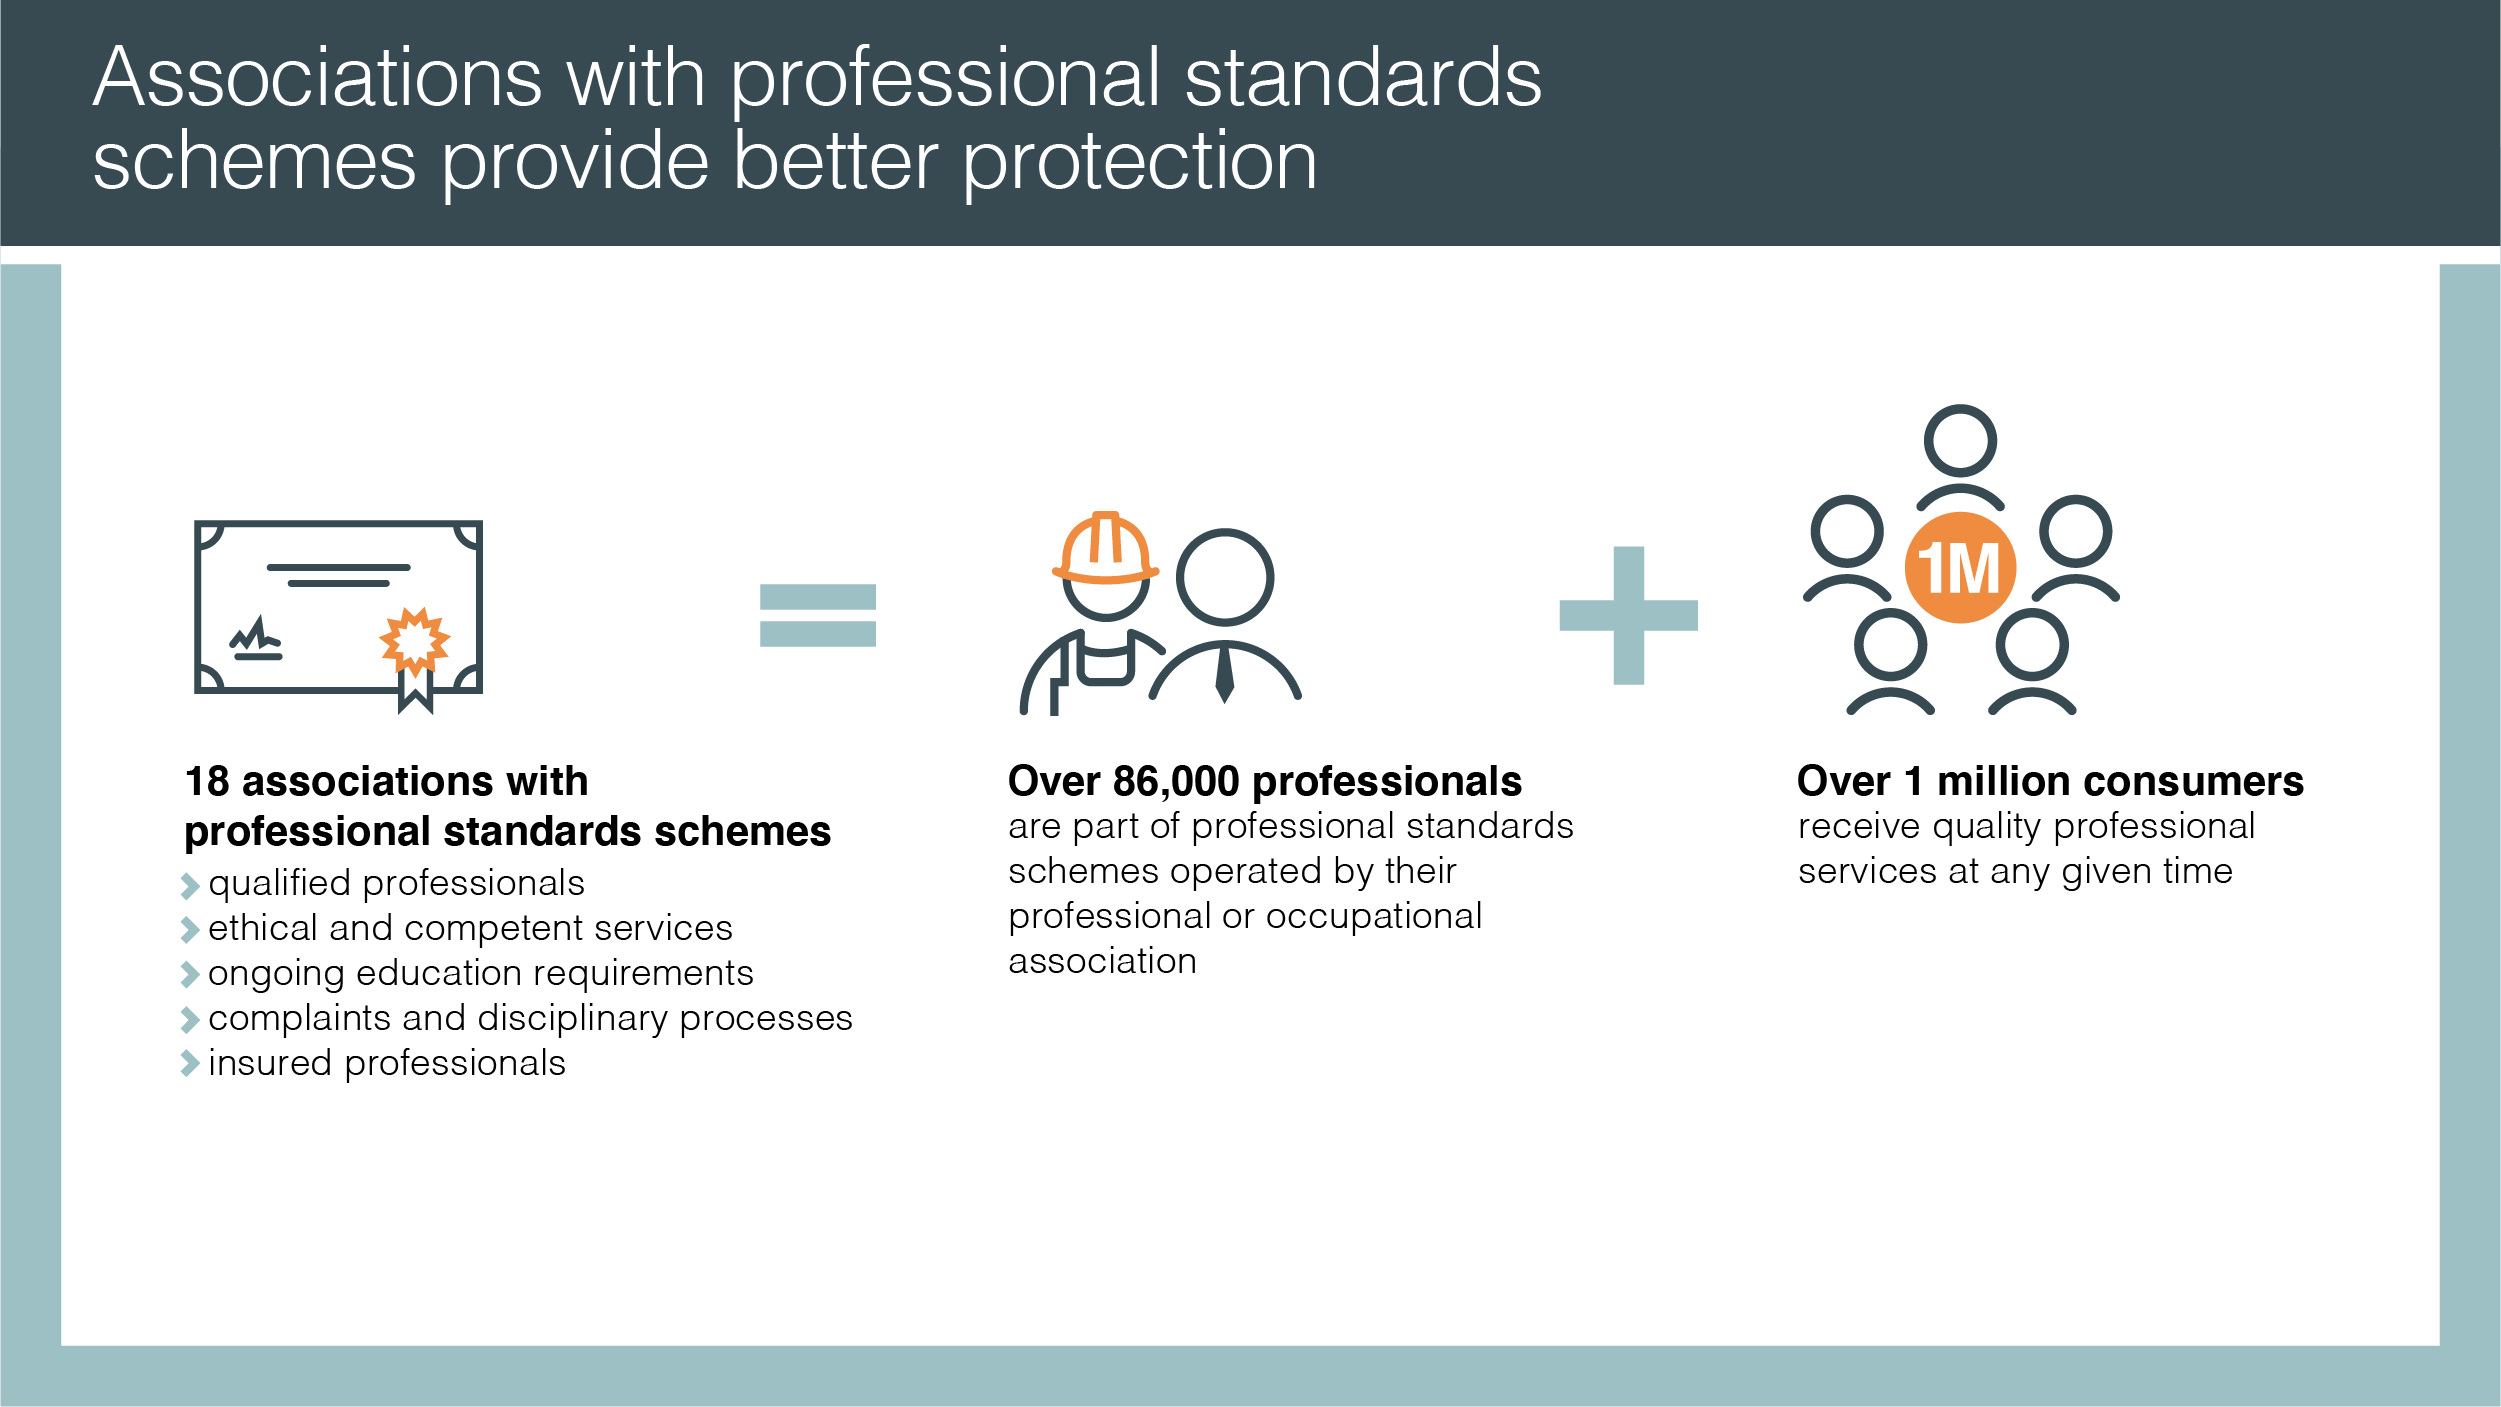 Associations with professional standards schemes provide better protection